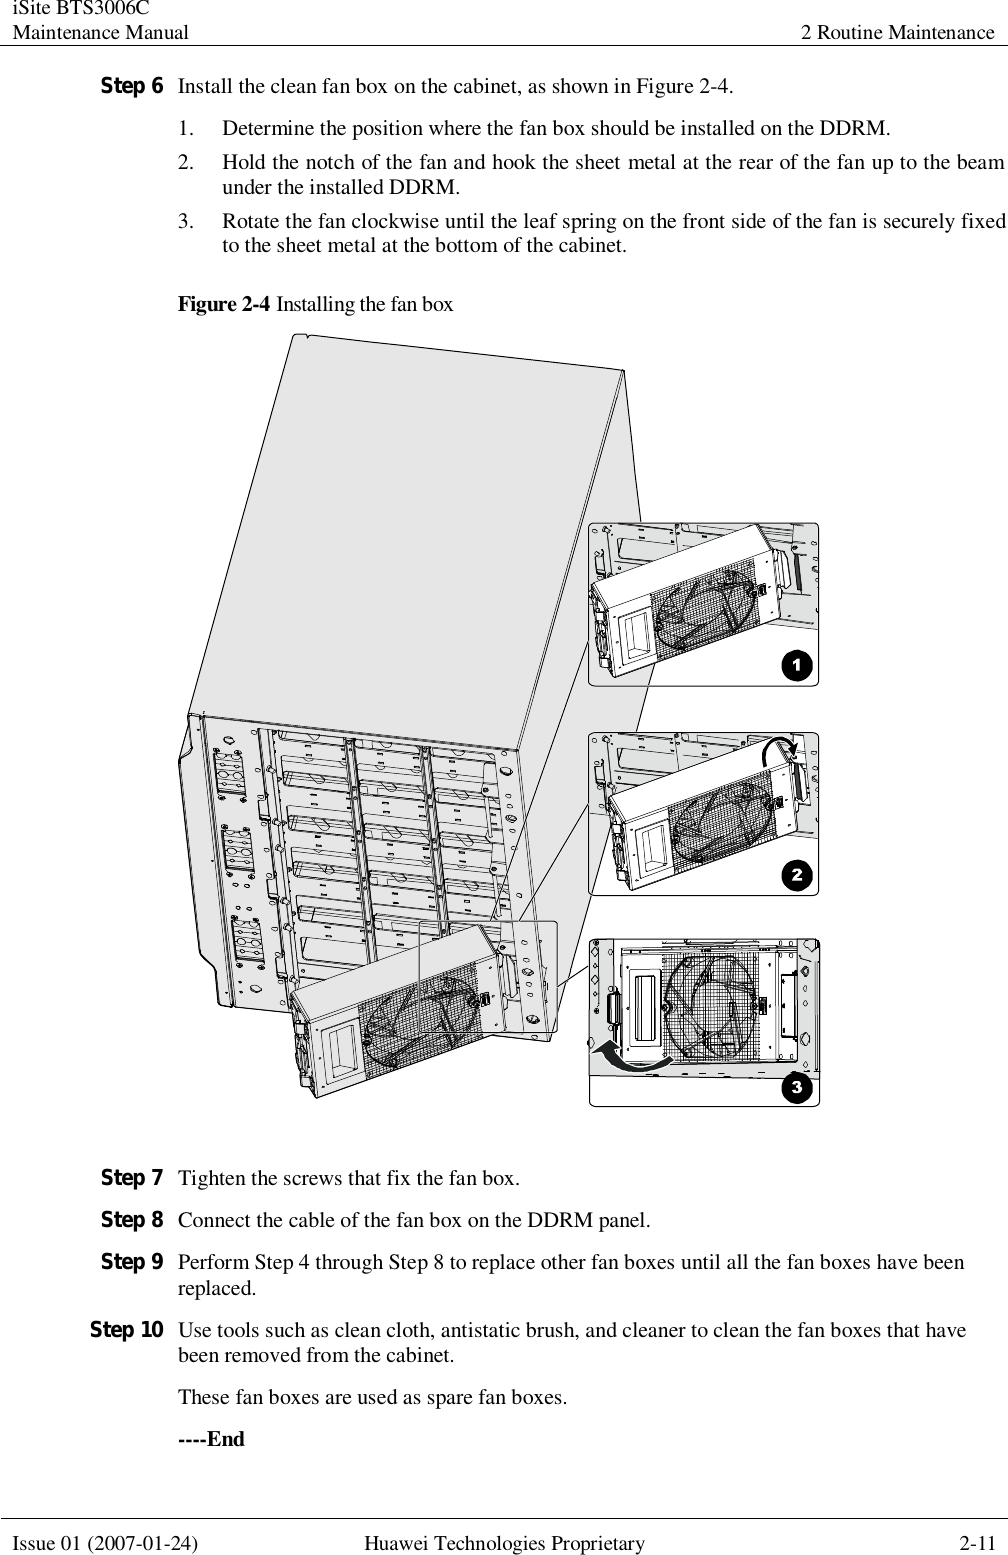 iSite BTS3006C Maintenance Manual 2 Routine Maintenance  Issue 01 (2007-01-24) Huawei Technologies Proprietary 2-11  Step 6 Install the clean fan box on the cabinet, as shown in Figure 2-4. 1. Determine the position where the fan box should be installed on the DDRM. 2. Hold the notch of the fan and hook the sheet metal at the rear of the fan up to the beam under the installed DDRM. 3. Rotate the fan clockwise until the leaf spring on the front side of the fan is securely fixed to the sheet metal at the bottom of the cabinet. Figure 2-4 Installing the fan box   Step 7 Tighten the screws that fix the fan box. Step 8 Connect the cable of the fan box on the DDRM panel. Step 9 Perform Step 4 through Step 8 to replace other fan boxes until all the fan boxes have been replaced. Step 10 Use tools such as clean cloth, antistatic brush, and cleaner to clean the fan boxes that have been removed from the cabinet. These fan boxes are used as spare fan boxes. ----End 